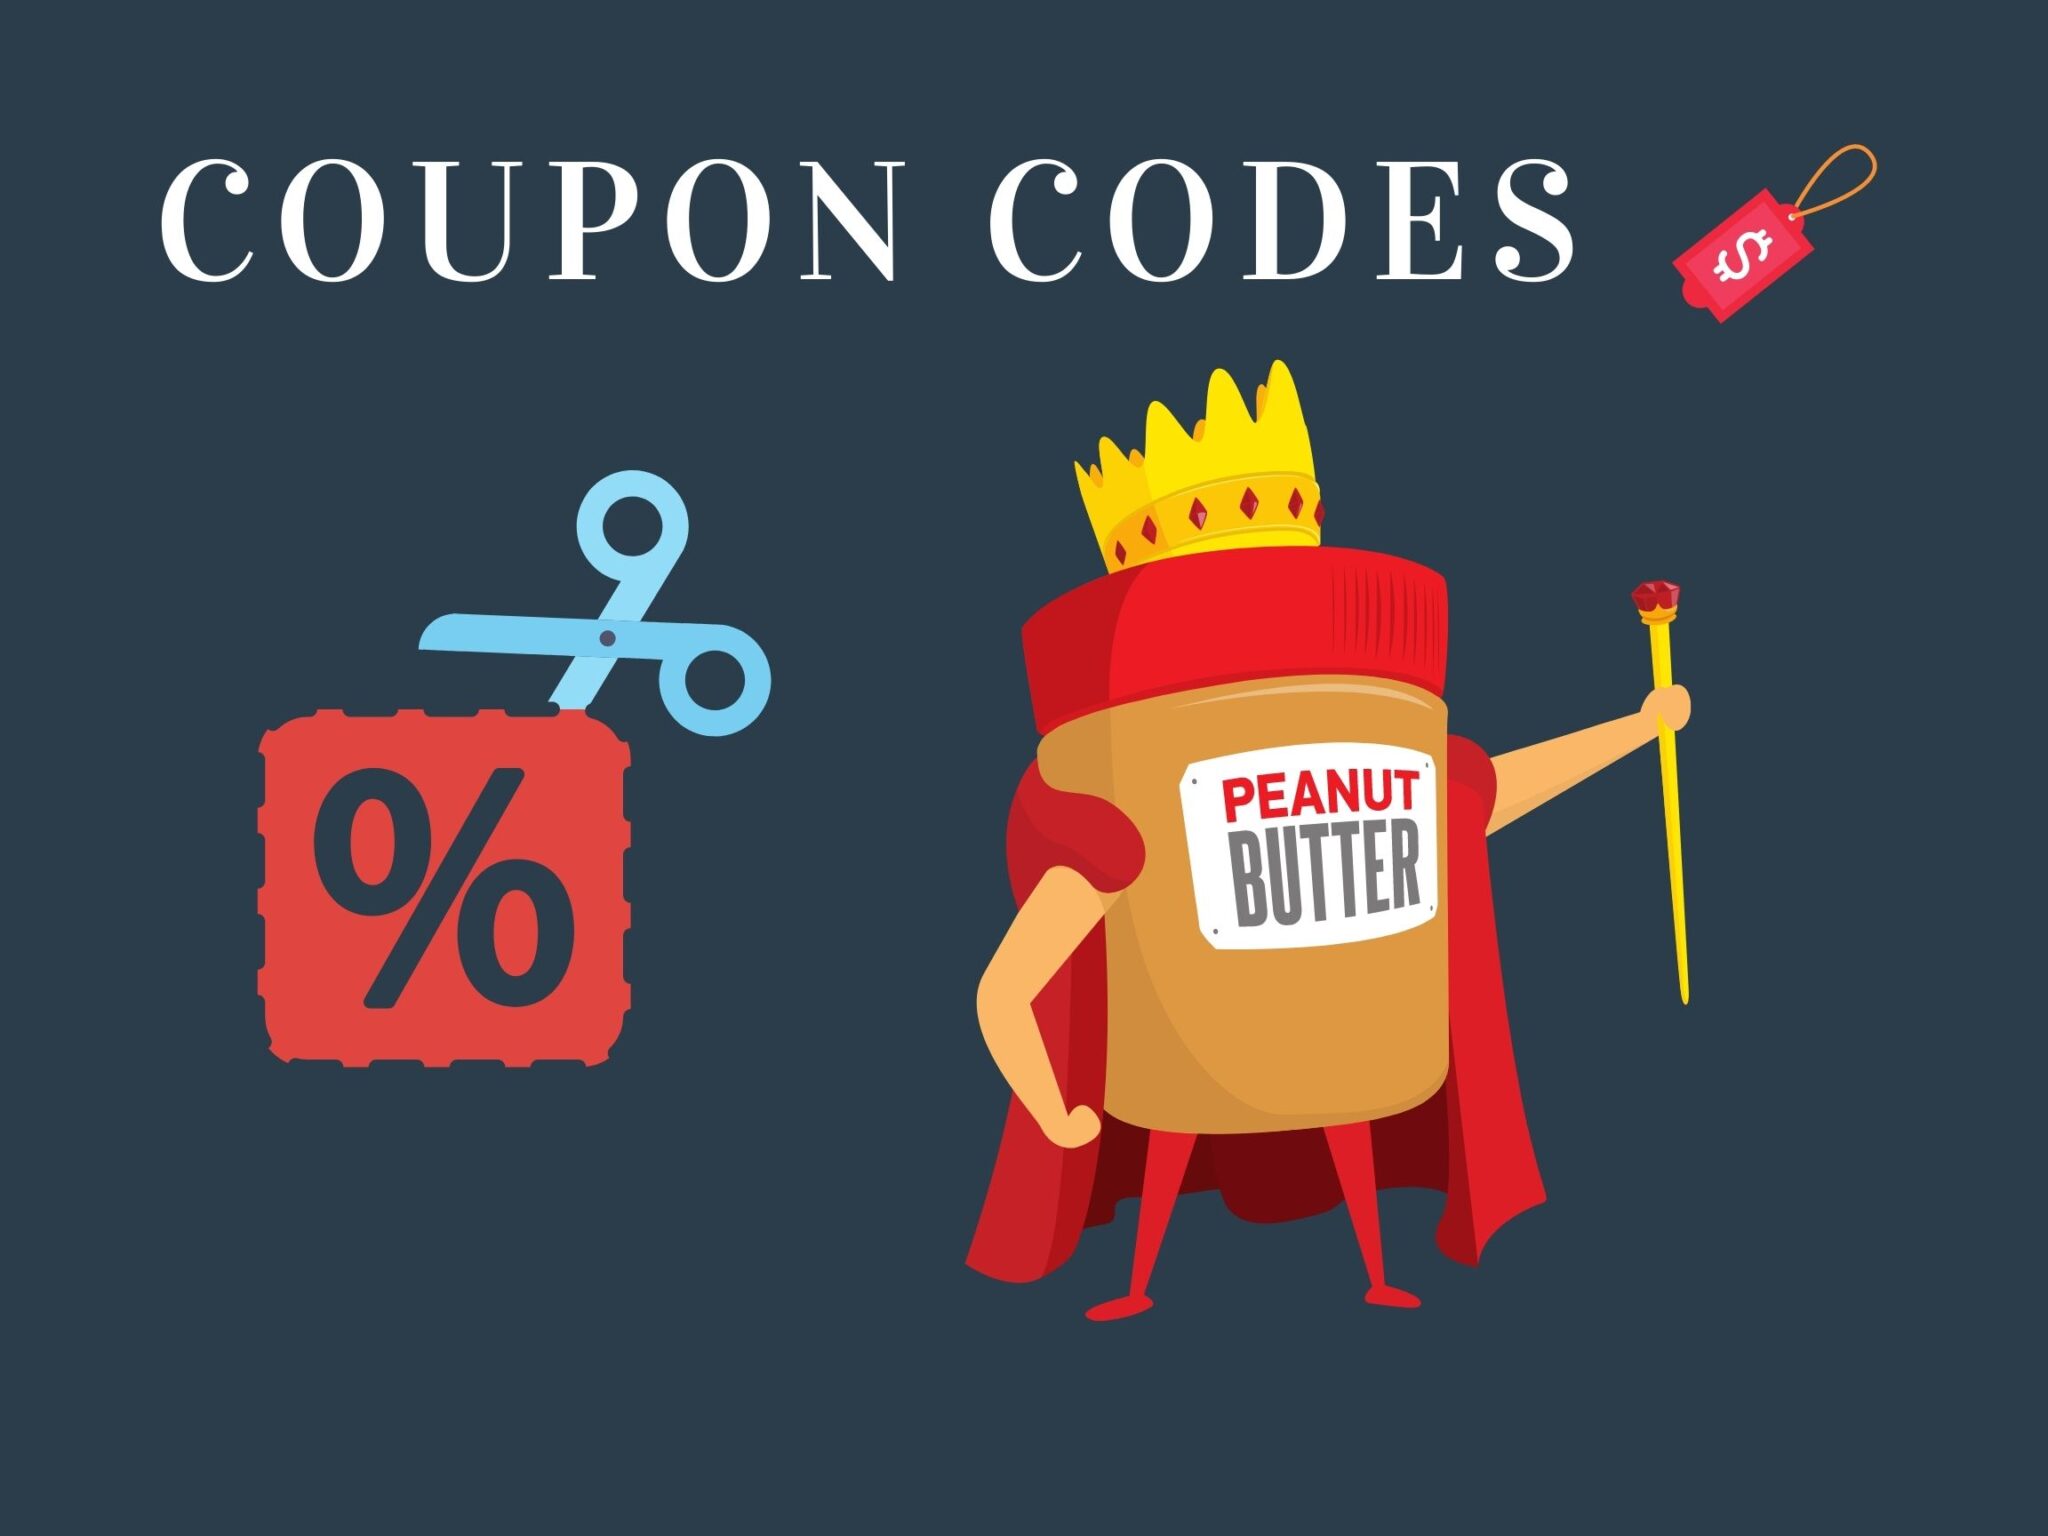 Peanut Butter coupons